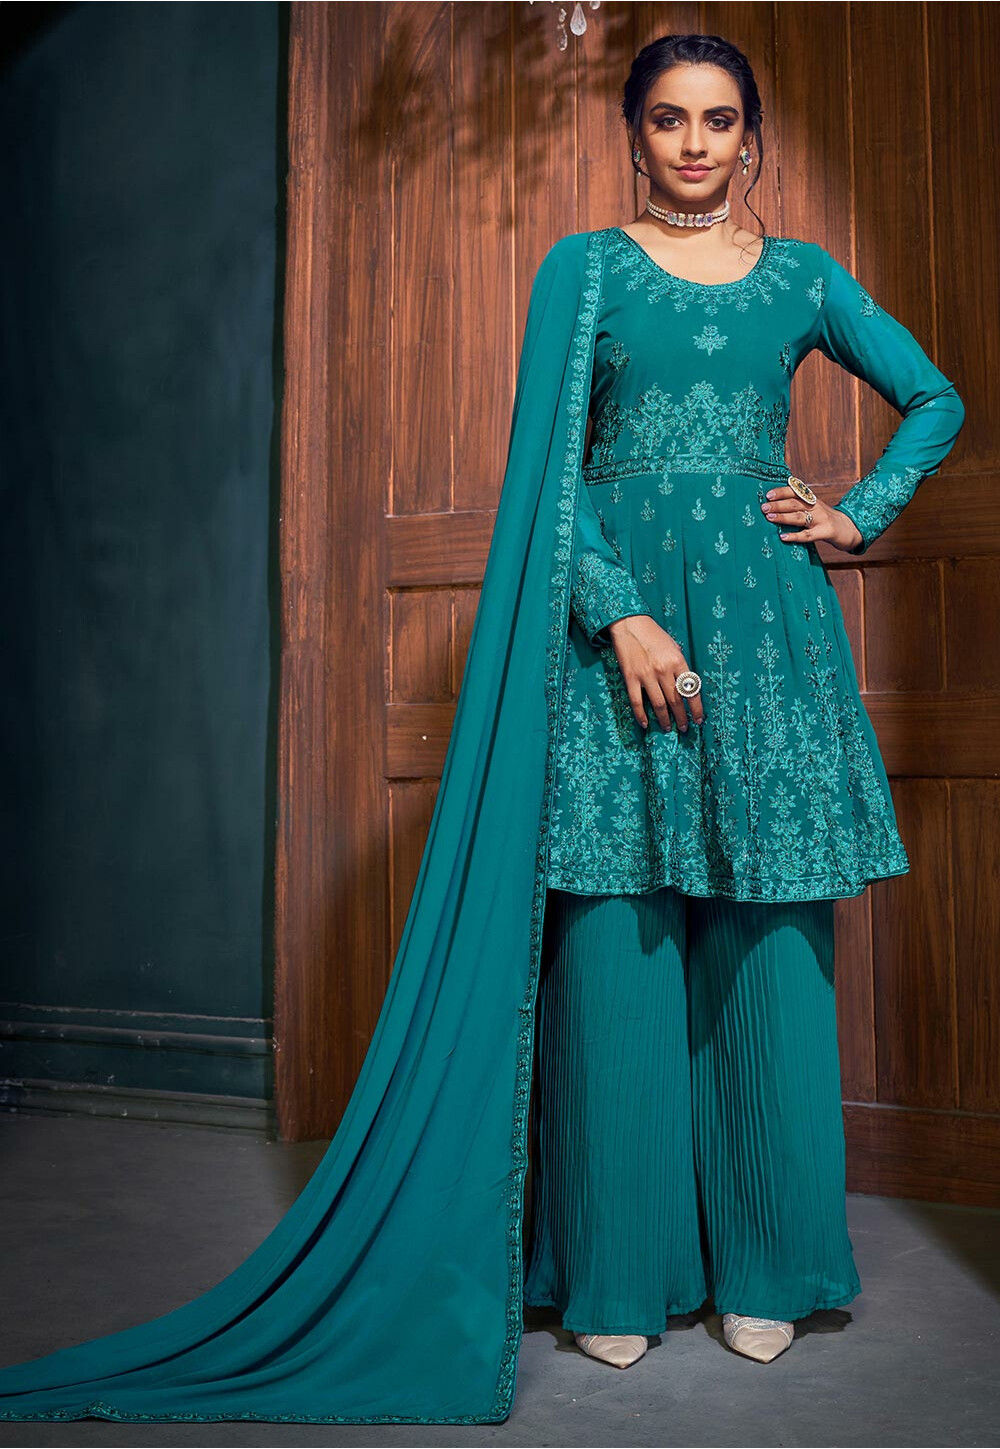 Embroidered Georgette Pakistani Suit in Teal Blue : KJC1407